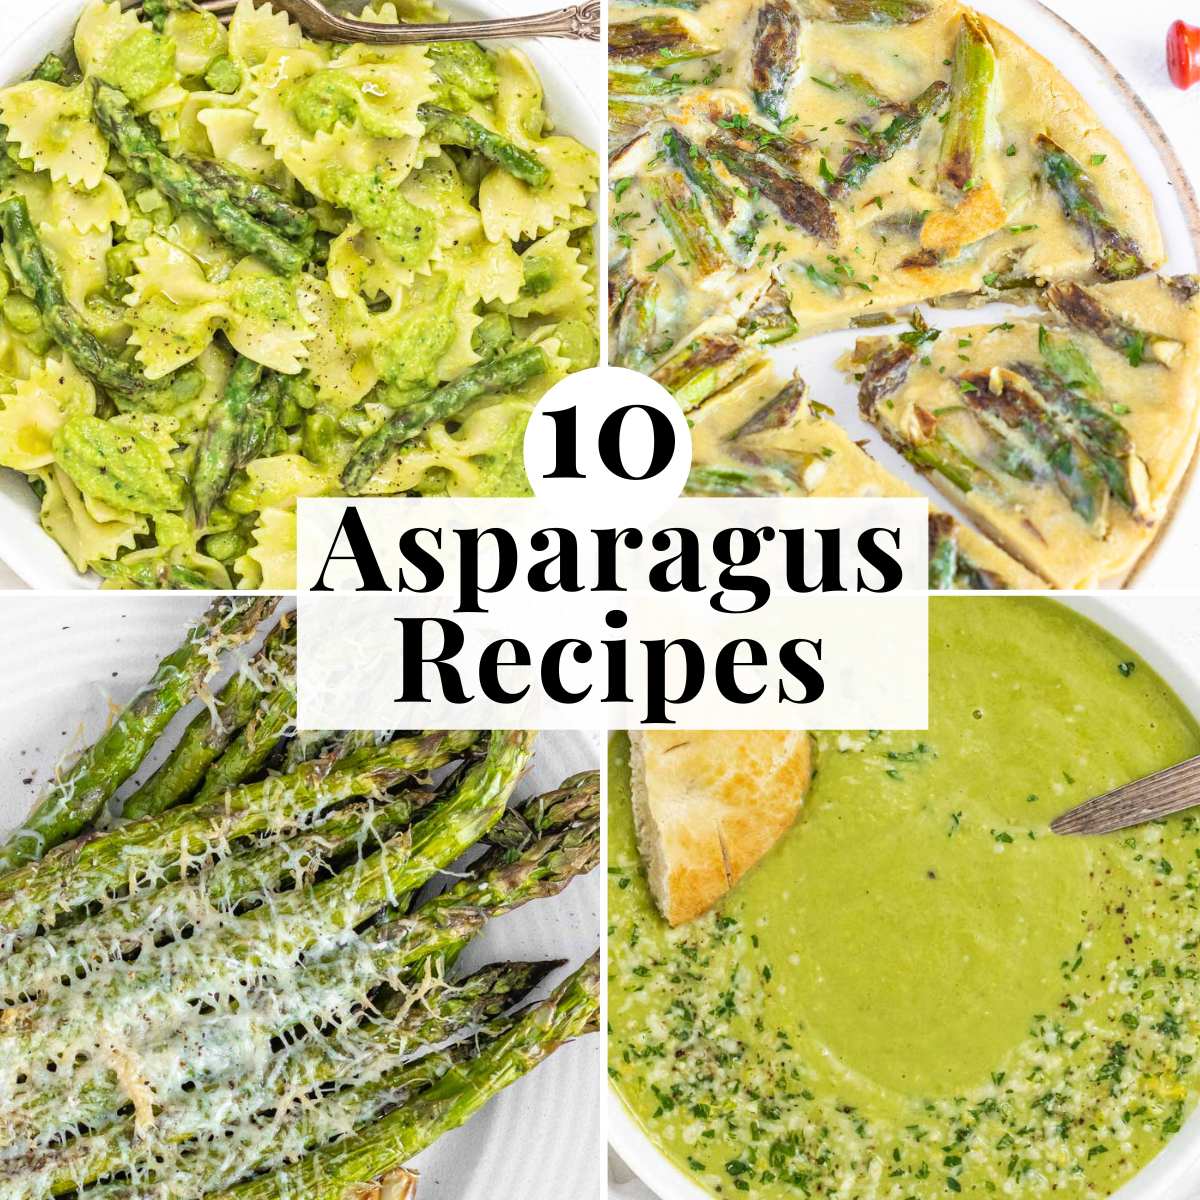 Easy asparagus recipes with soup and pasta ideas